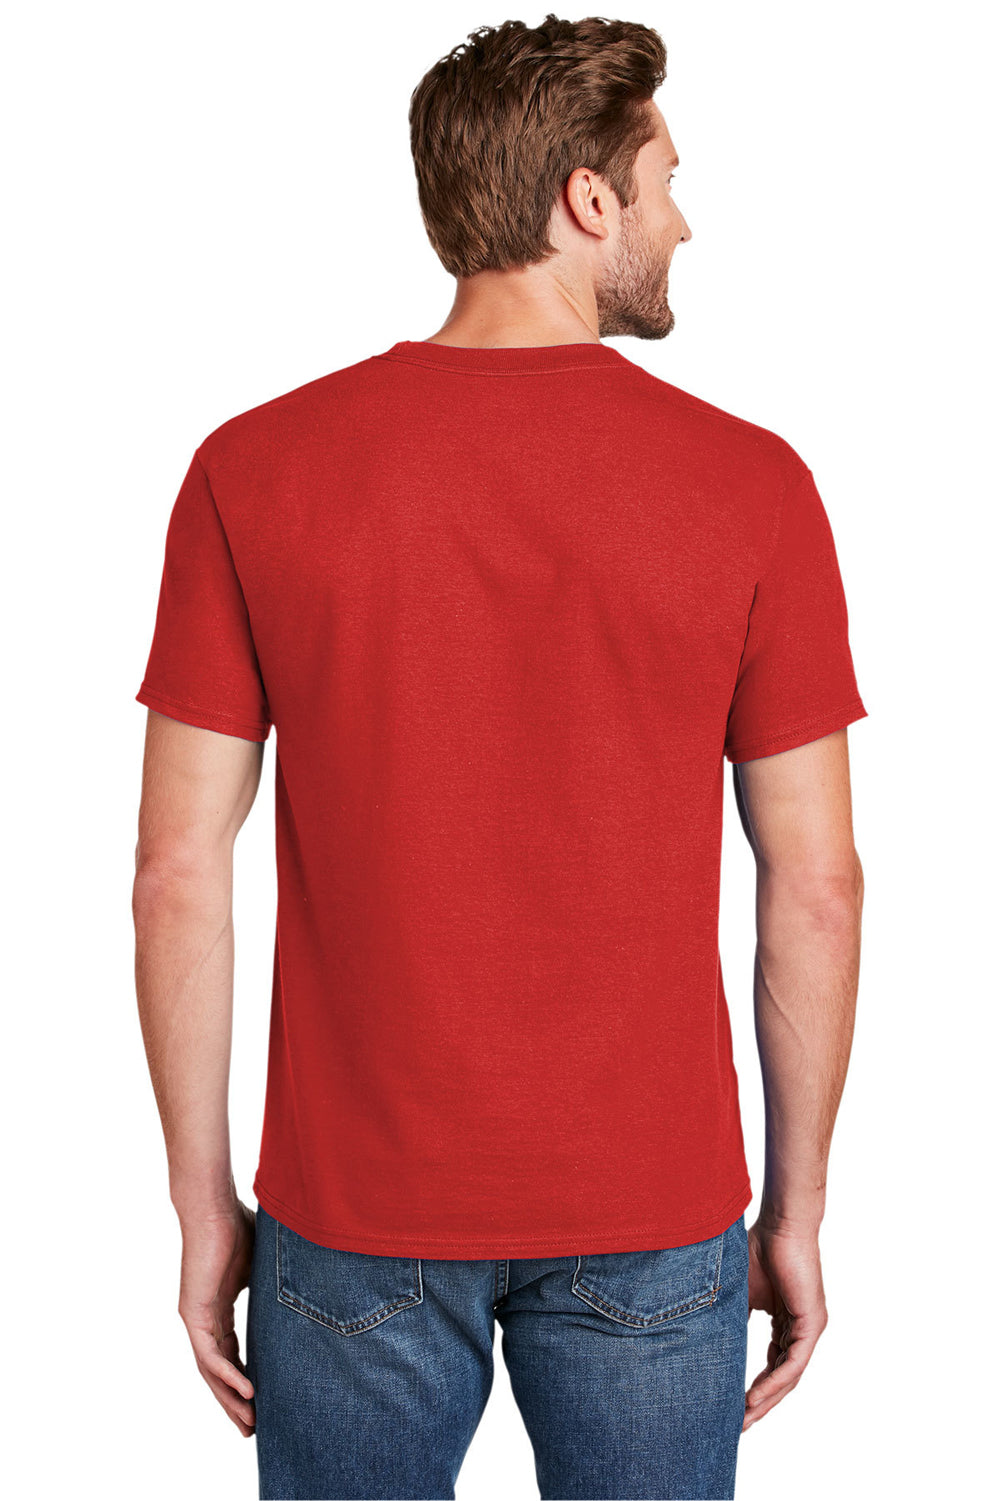 Hanes 5180/518T Mens Beefy-T Short Sleeve Crewneck T-Shirt Athletic Red Back